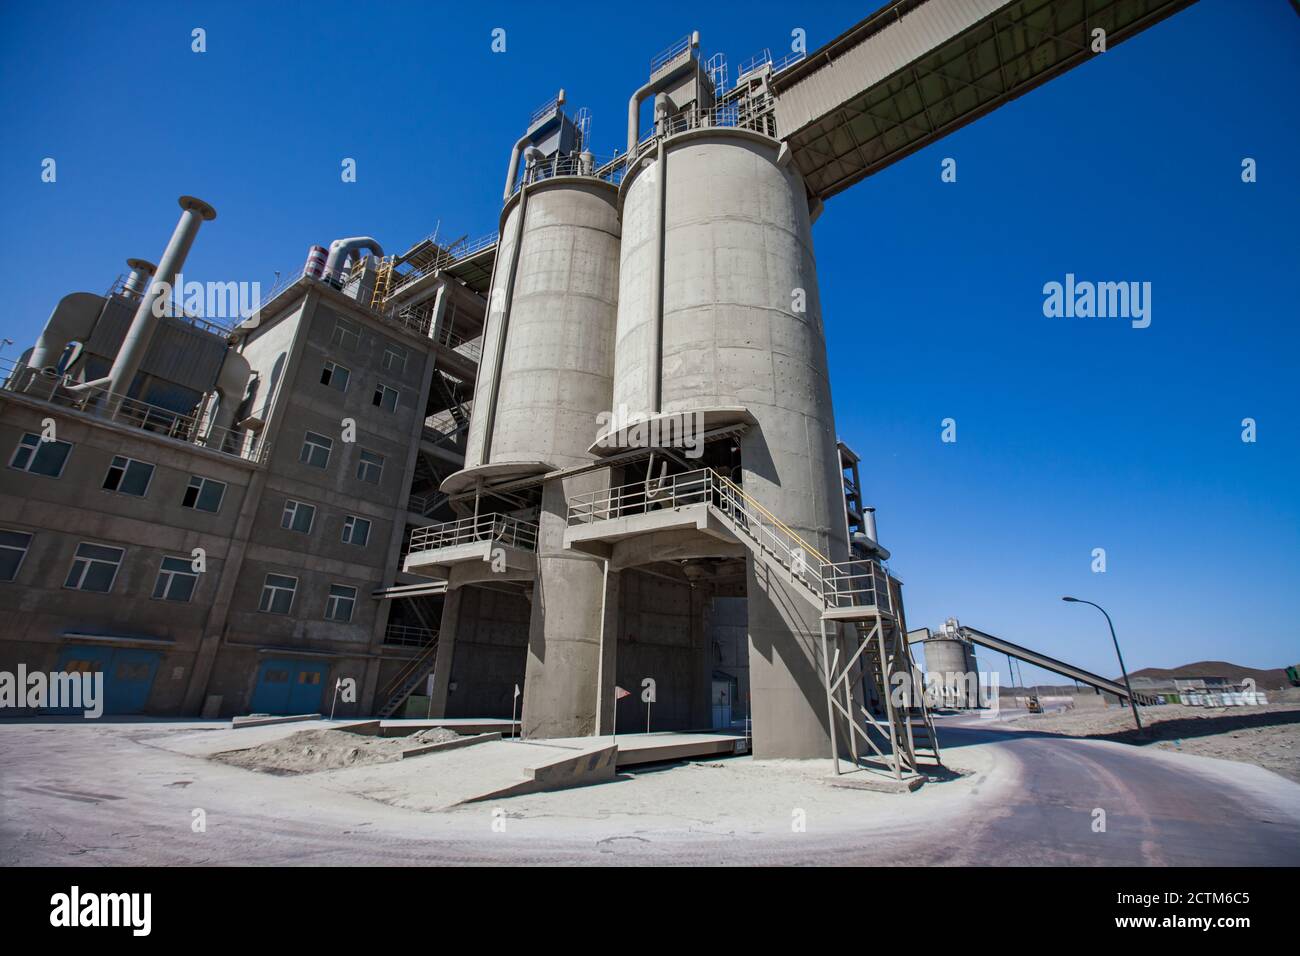 Modern cement plant in desert. Cement silos (cement tower), factory building and conveyor on blue sky. Stock Photo